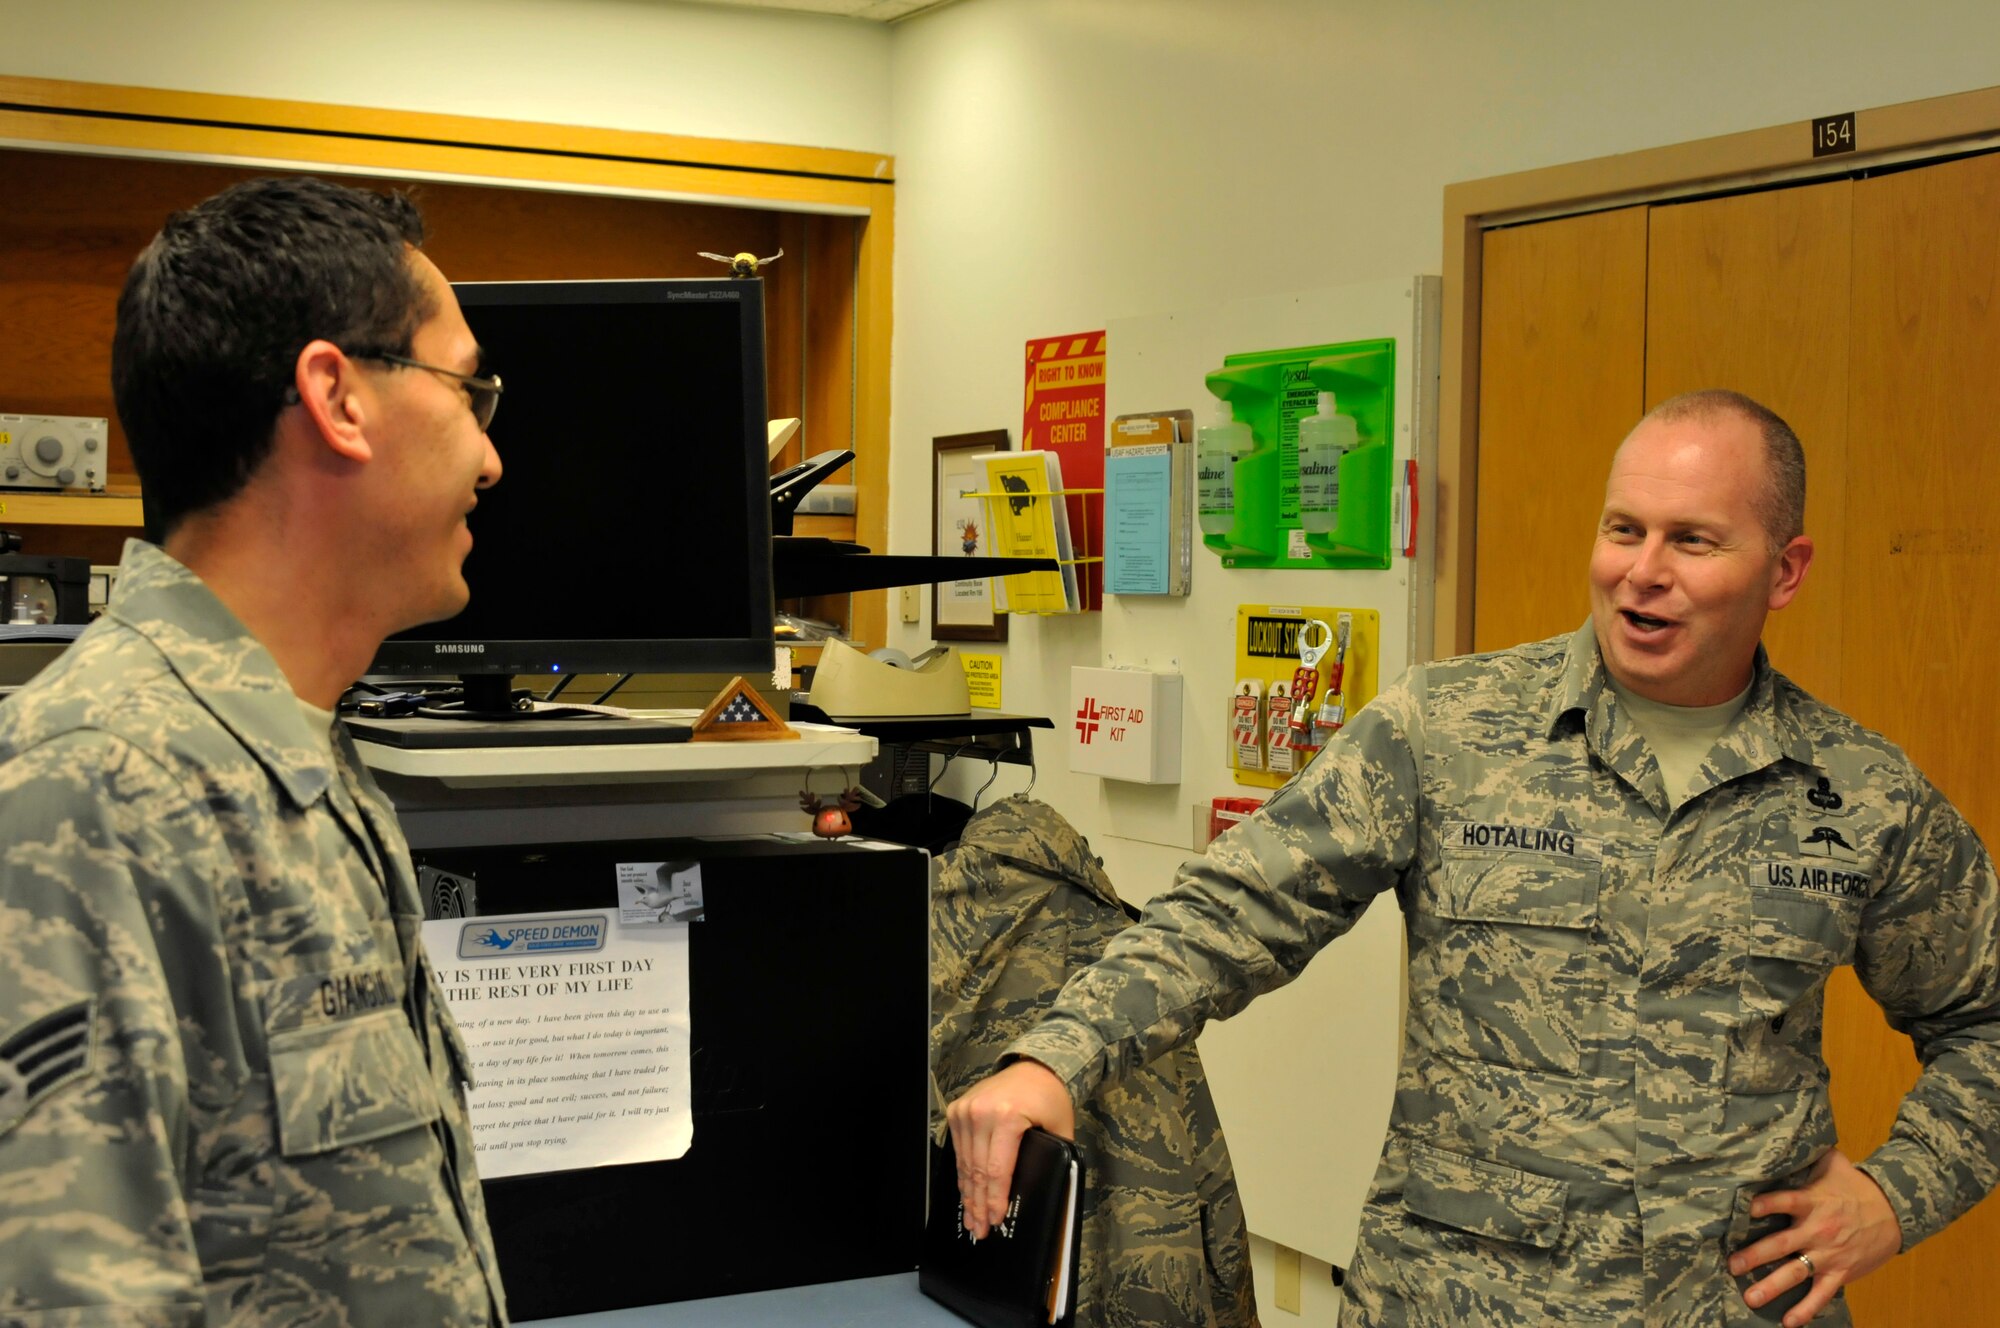 Air National Guard Command Chief Master Sgt. James W. Hotaling speaks with Senior Airman John Gianguilli at Ebbing Air National Guard Base, Fort Smith, Ark., April 5, 2014. Hotaling visited with many Airmen during his time at the 188th Fighter Wing. He also met with wing leadership before touring the unit’s facilities.  (U.S. Air National Guard photo by Airman 1st Class Cody Martin/Released)